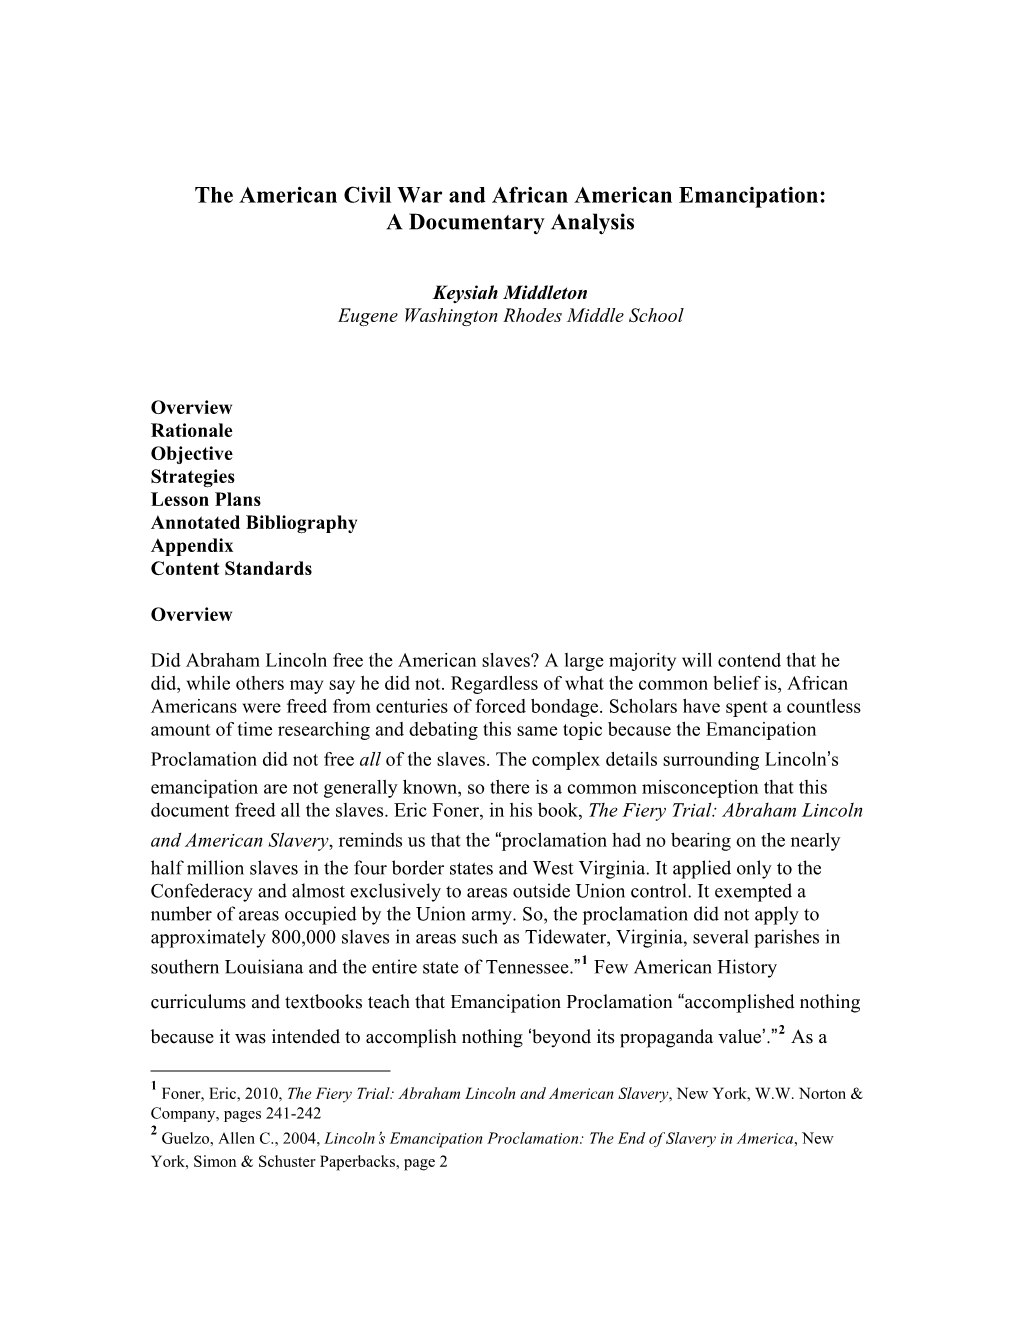 The American Civil War and African American Emancipation: a Documentary Analysis